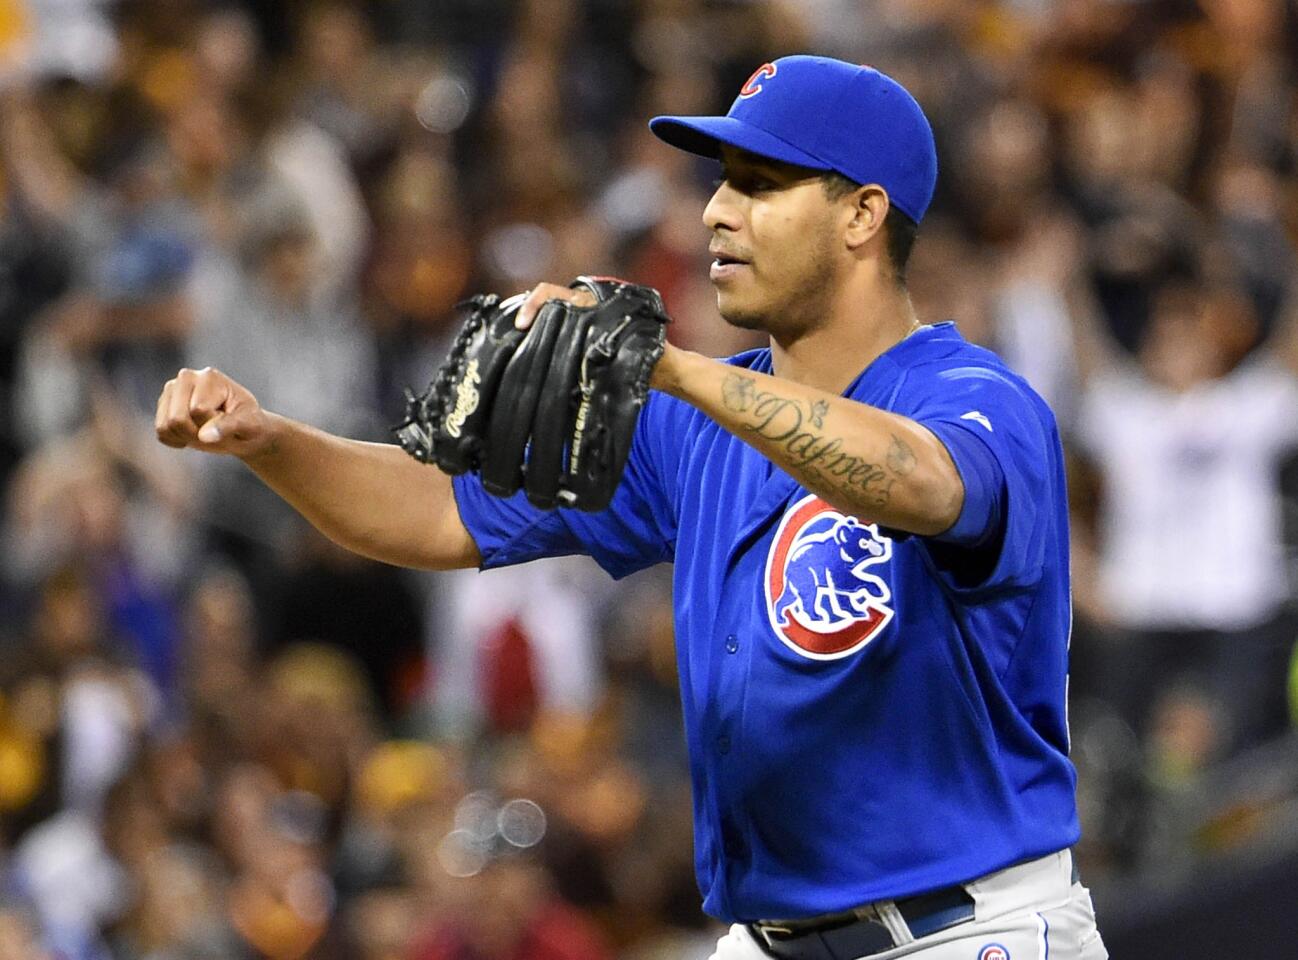 Cubs closer Hector Rondon reacts after getting final out.